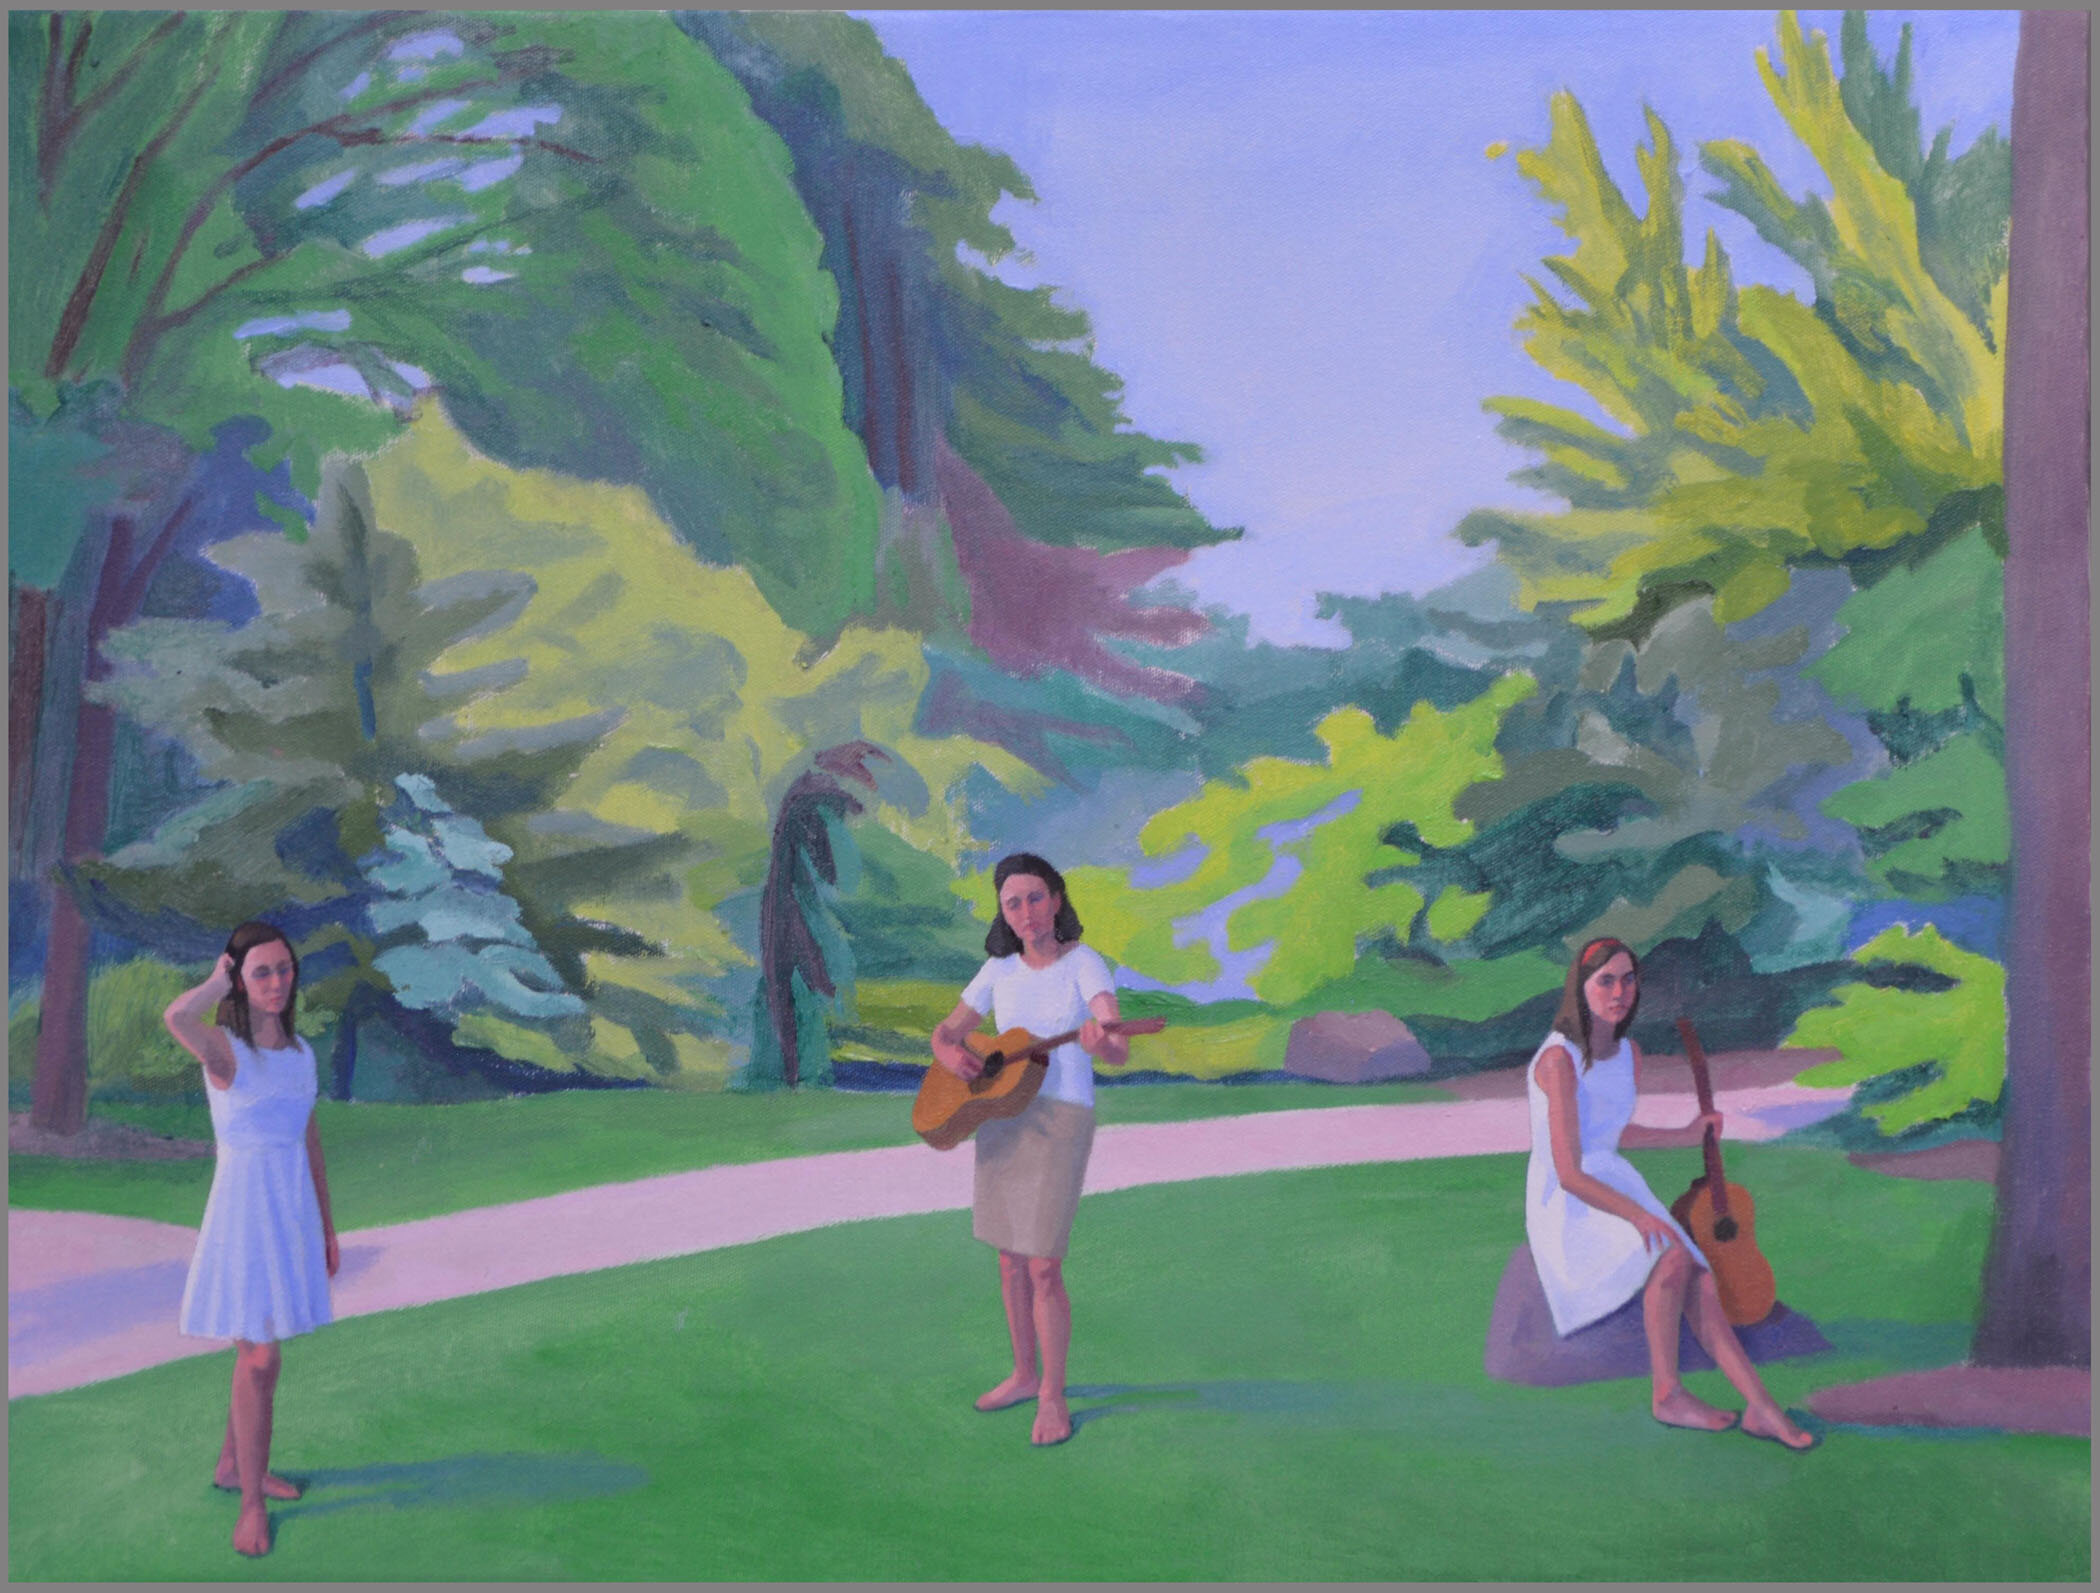 Three Graces with Wide Space, oil/canvas, 18 x 24 inches